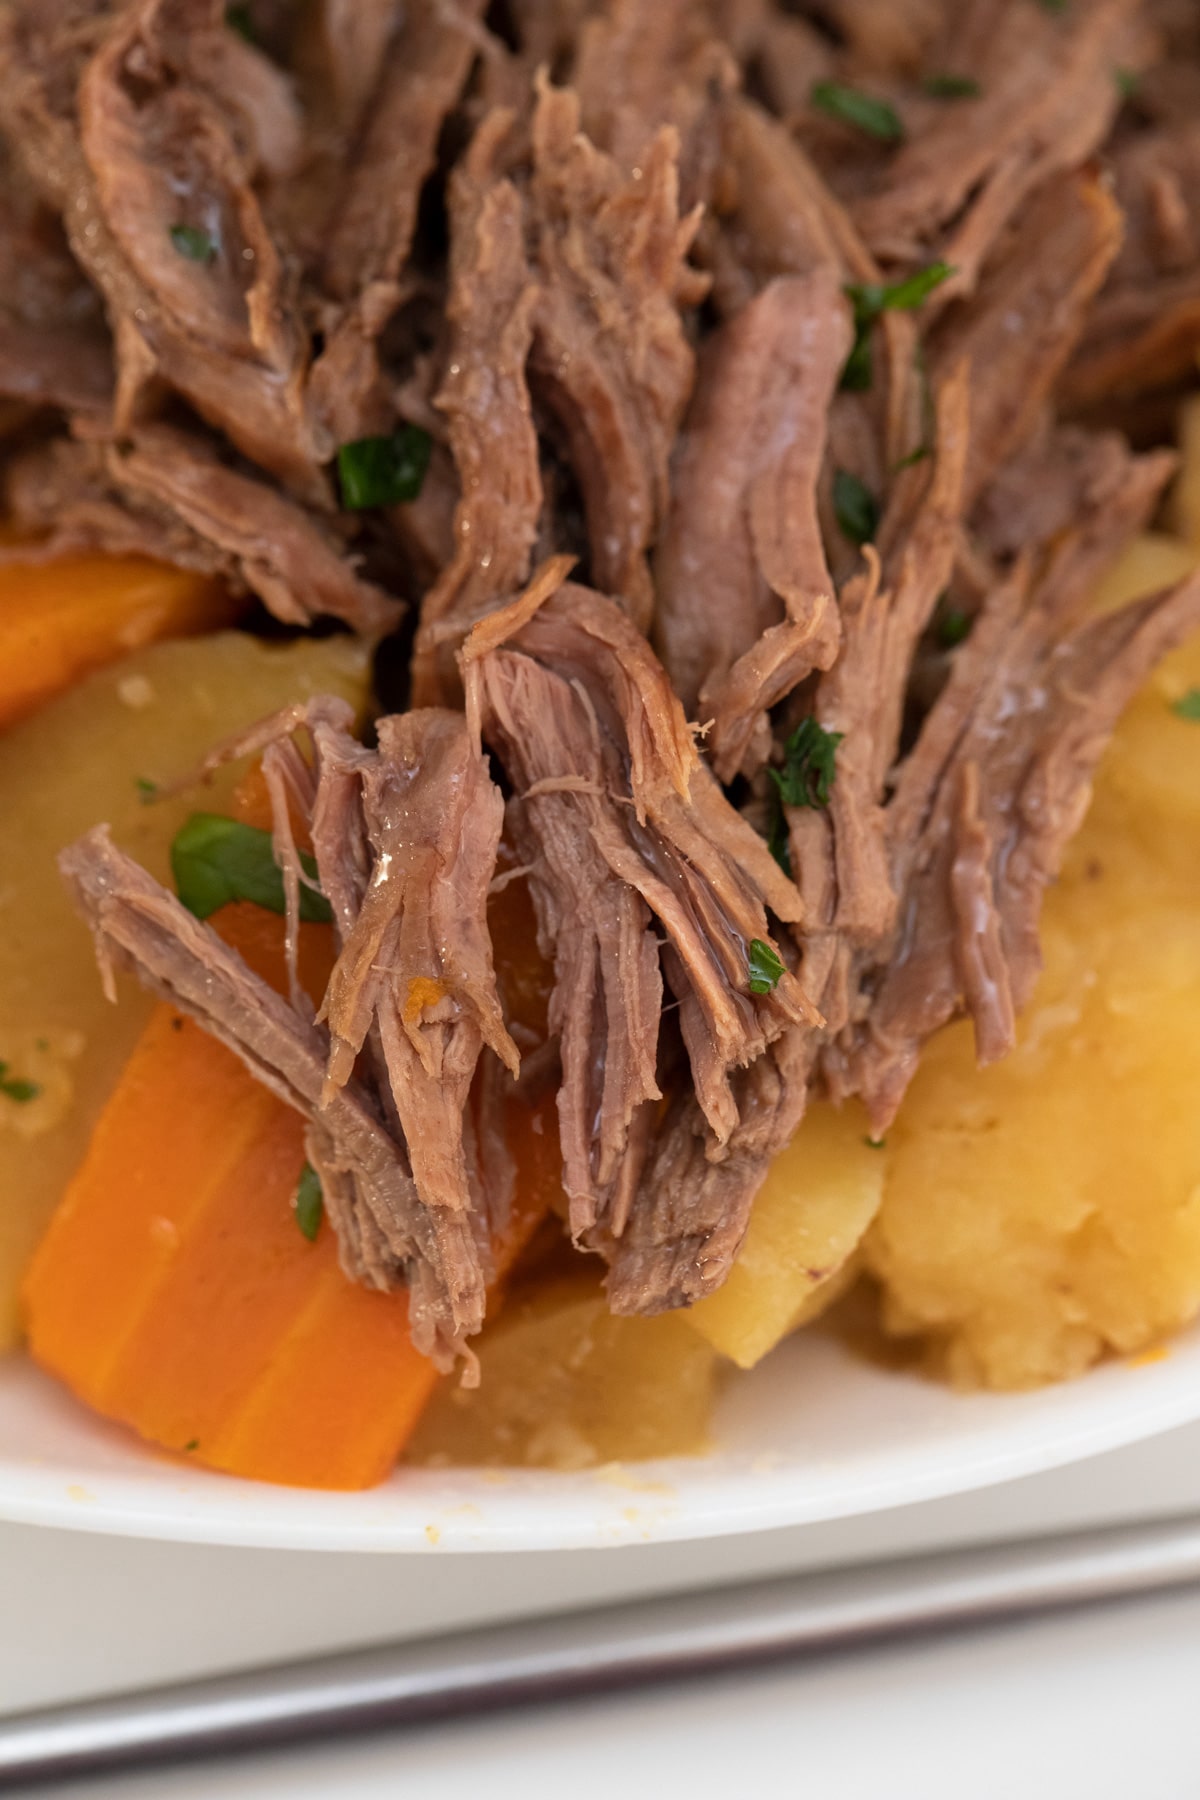 Shredded beef on top of cooked potatoes and carrots